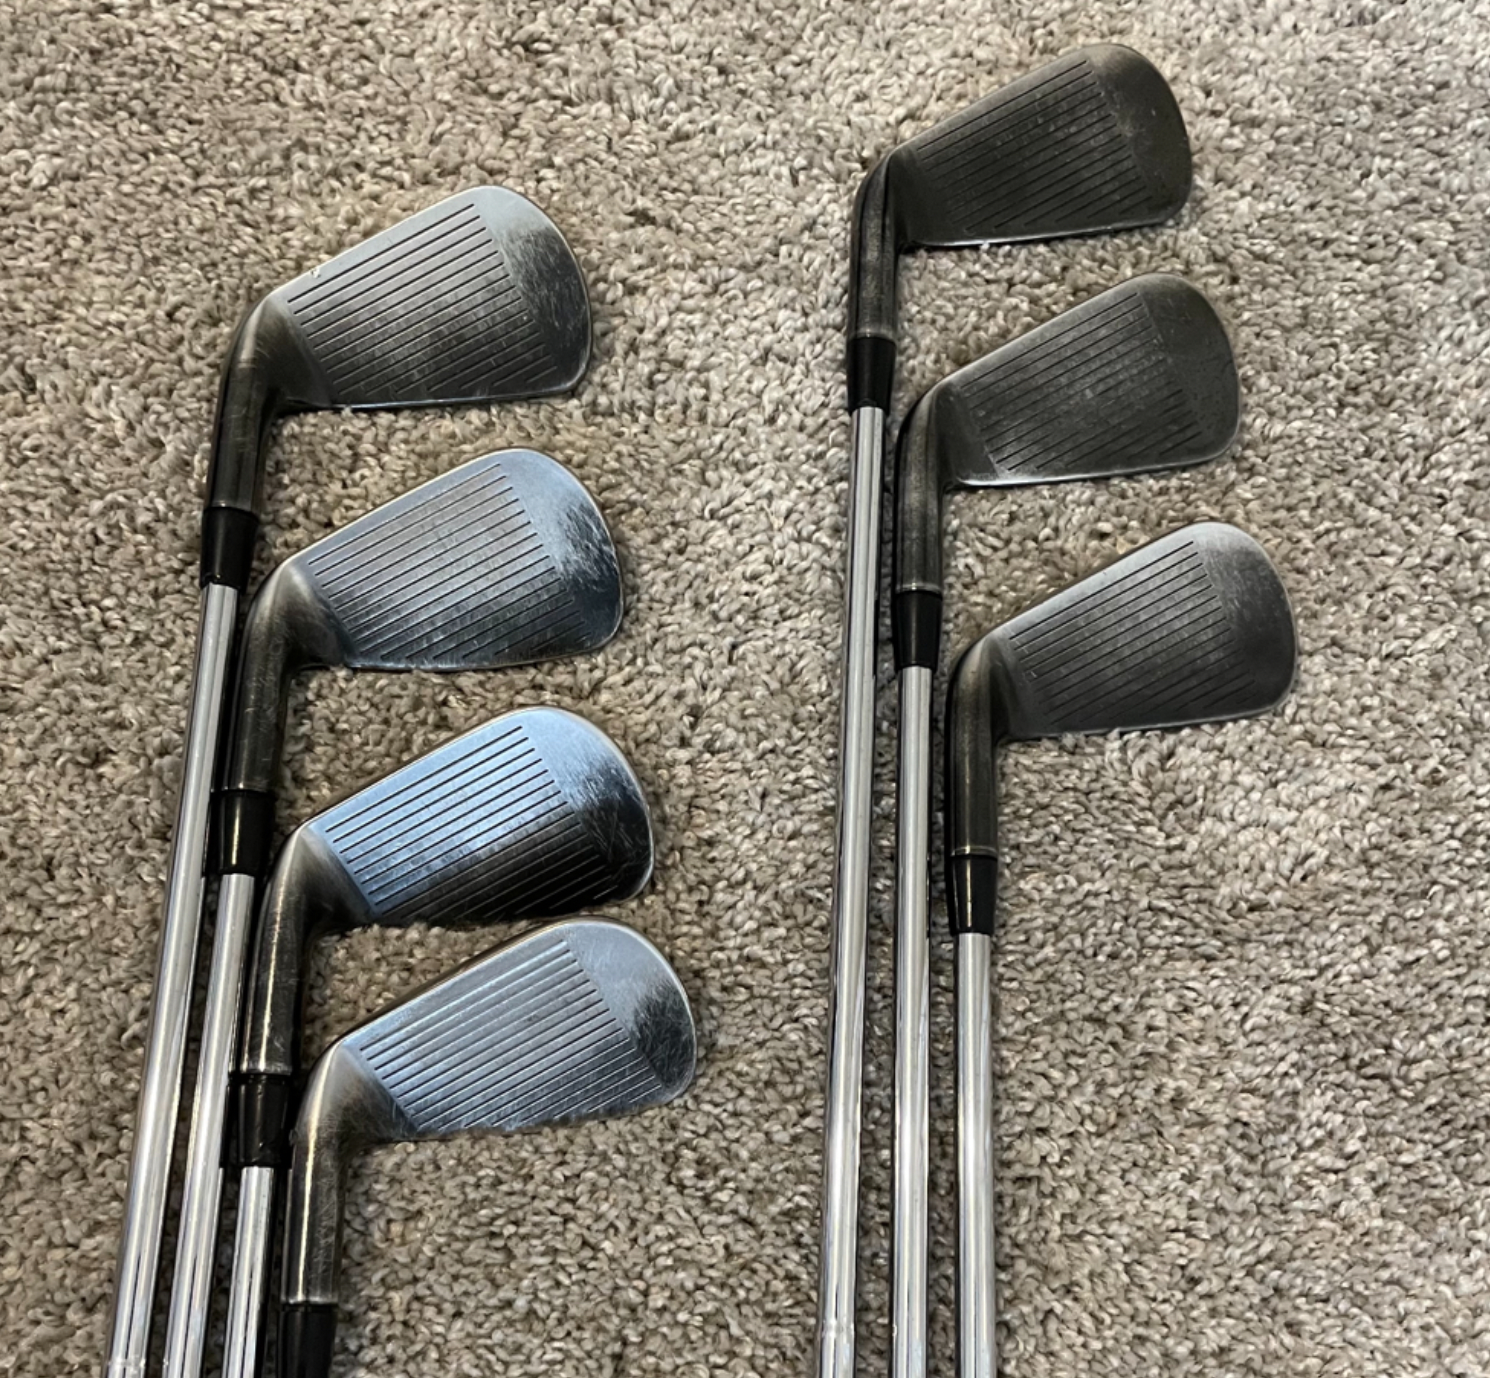 Product long Schotel Coolest thing for sale in the GolfWRX Classifieds (08/18/21): Nike Vapor  Fly Pro irons – GolfWRX